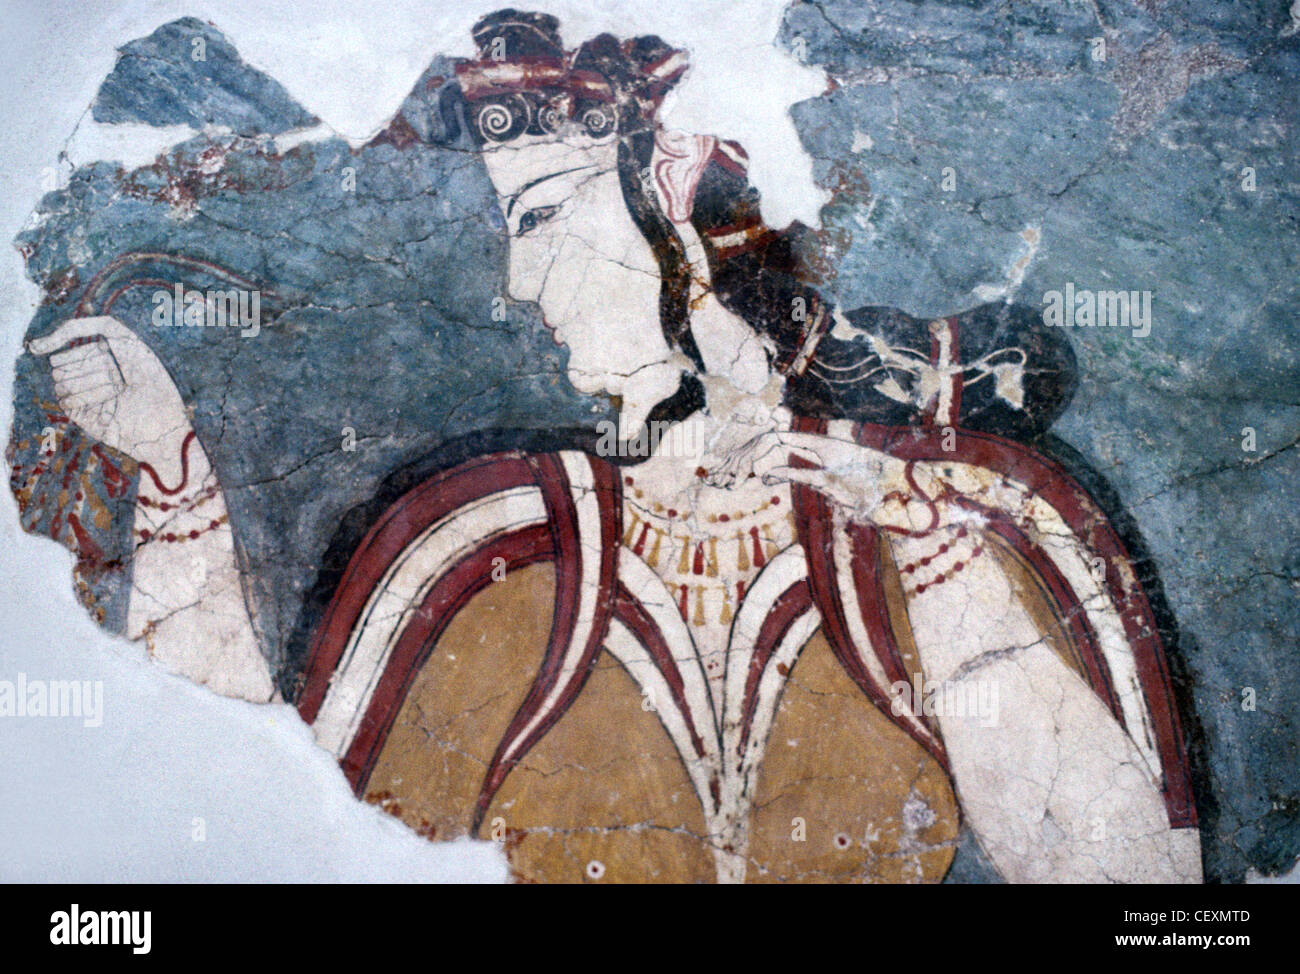 fresco-or-wall-painting-of-the-lady-of-m